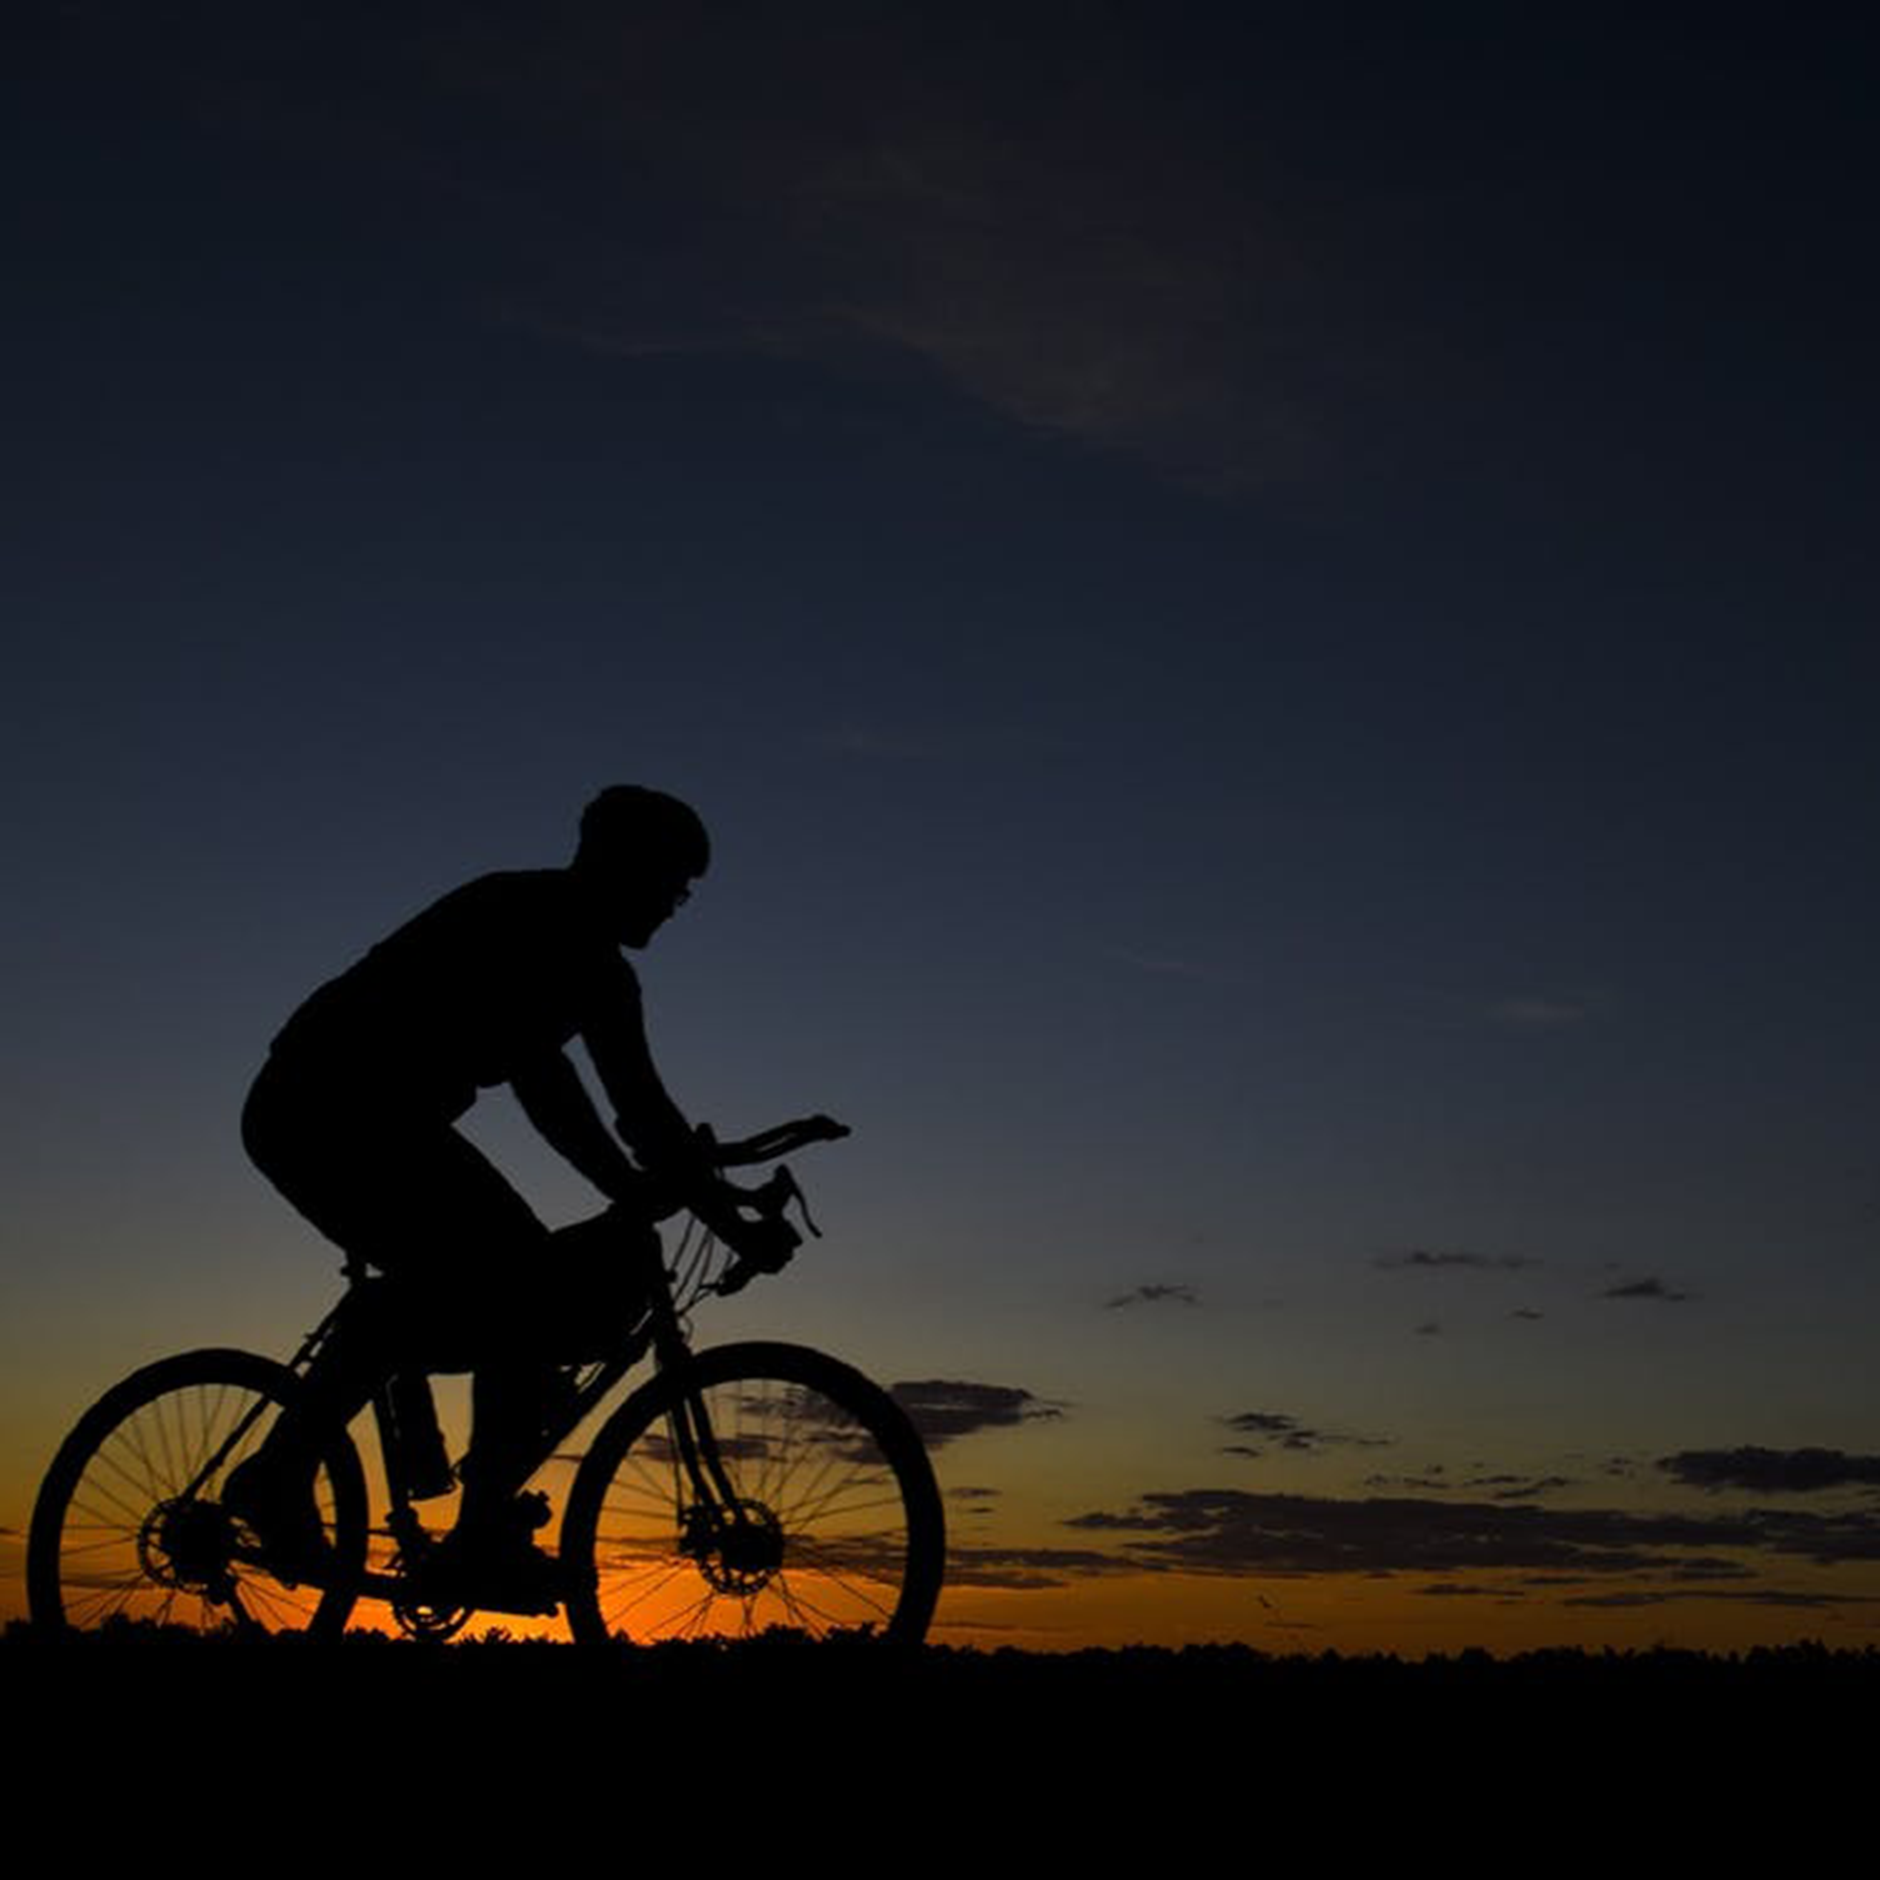 Cyclist silhouetted against sunset